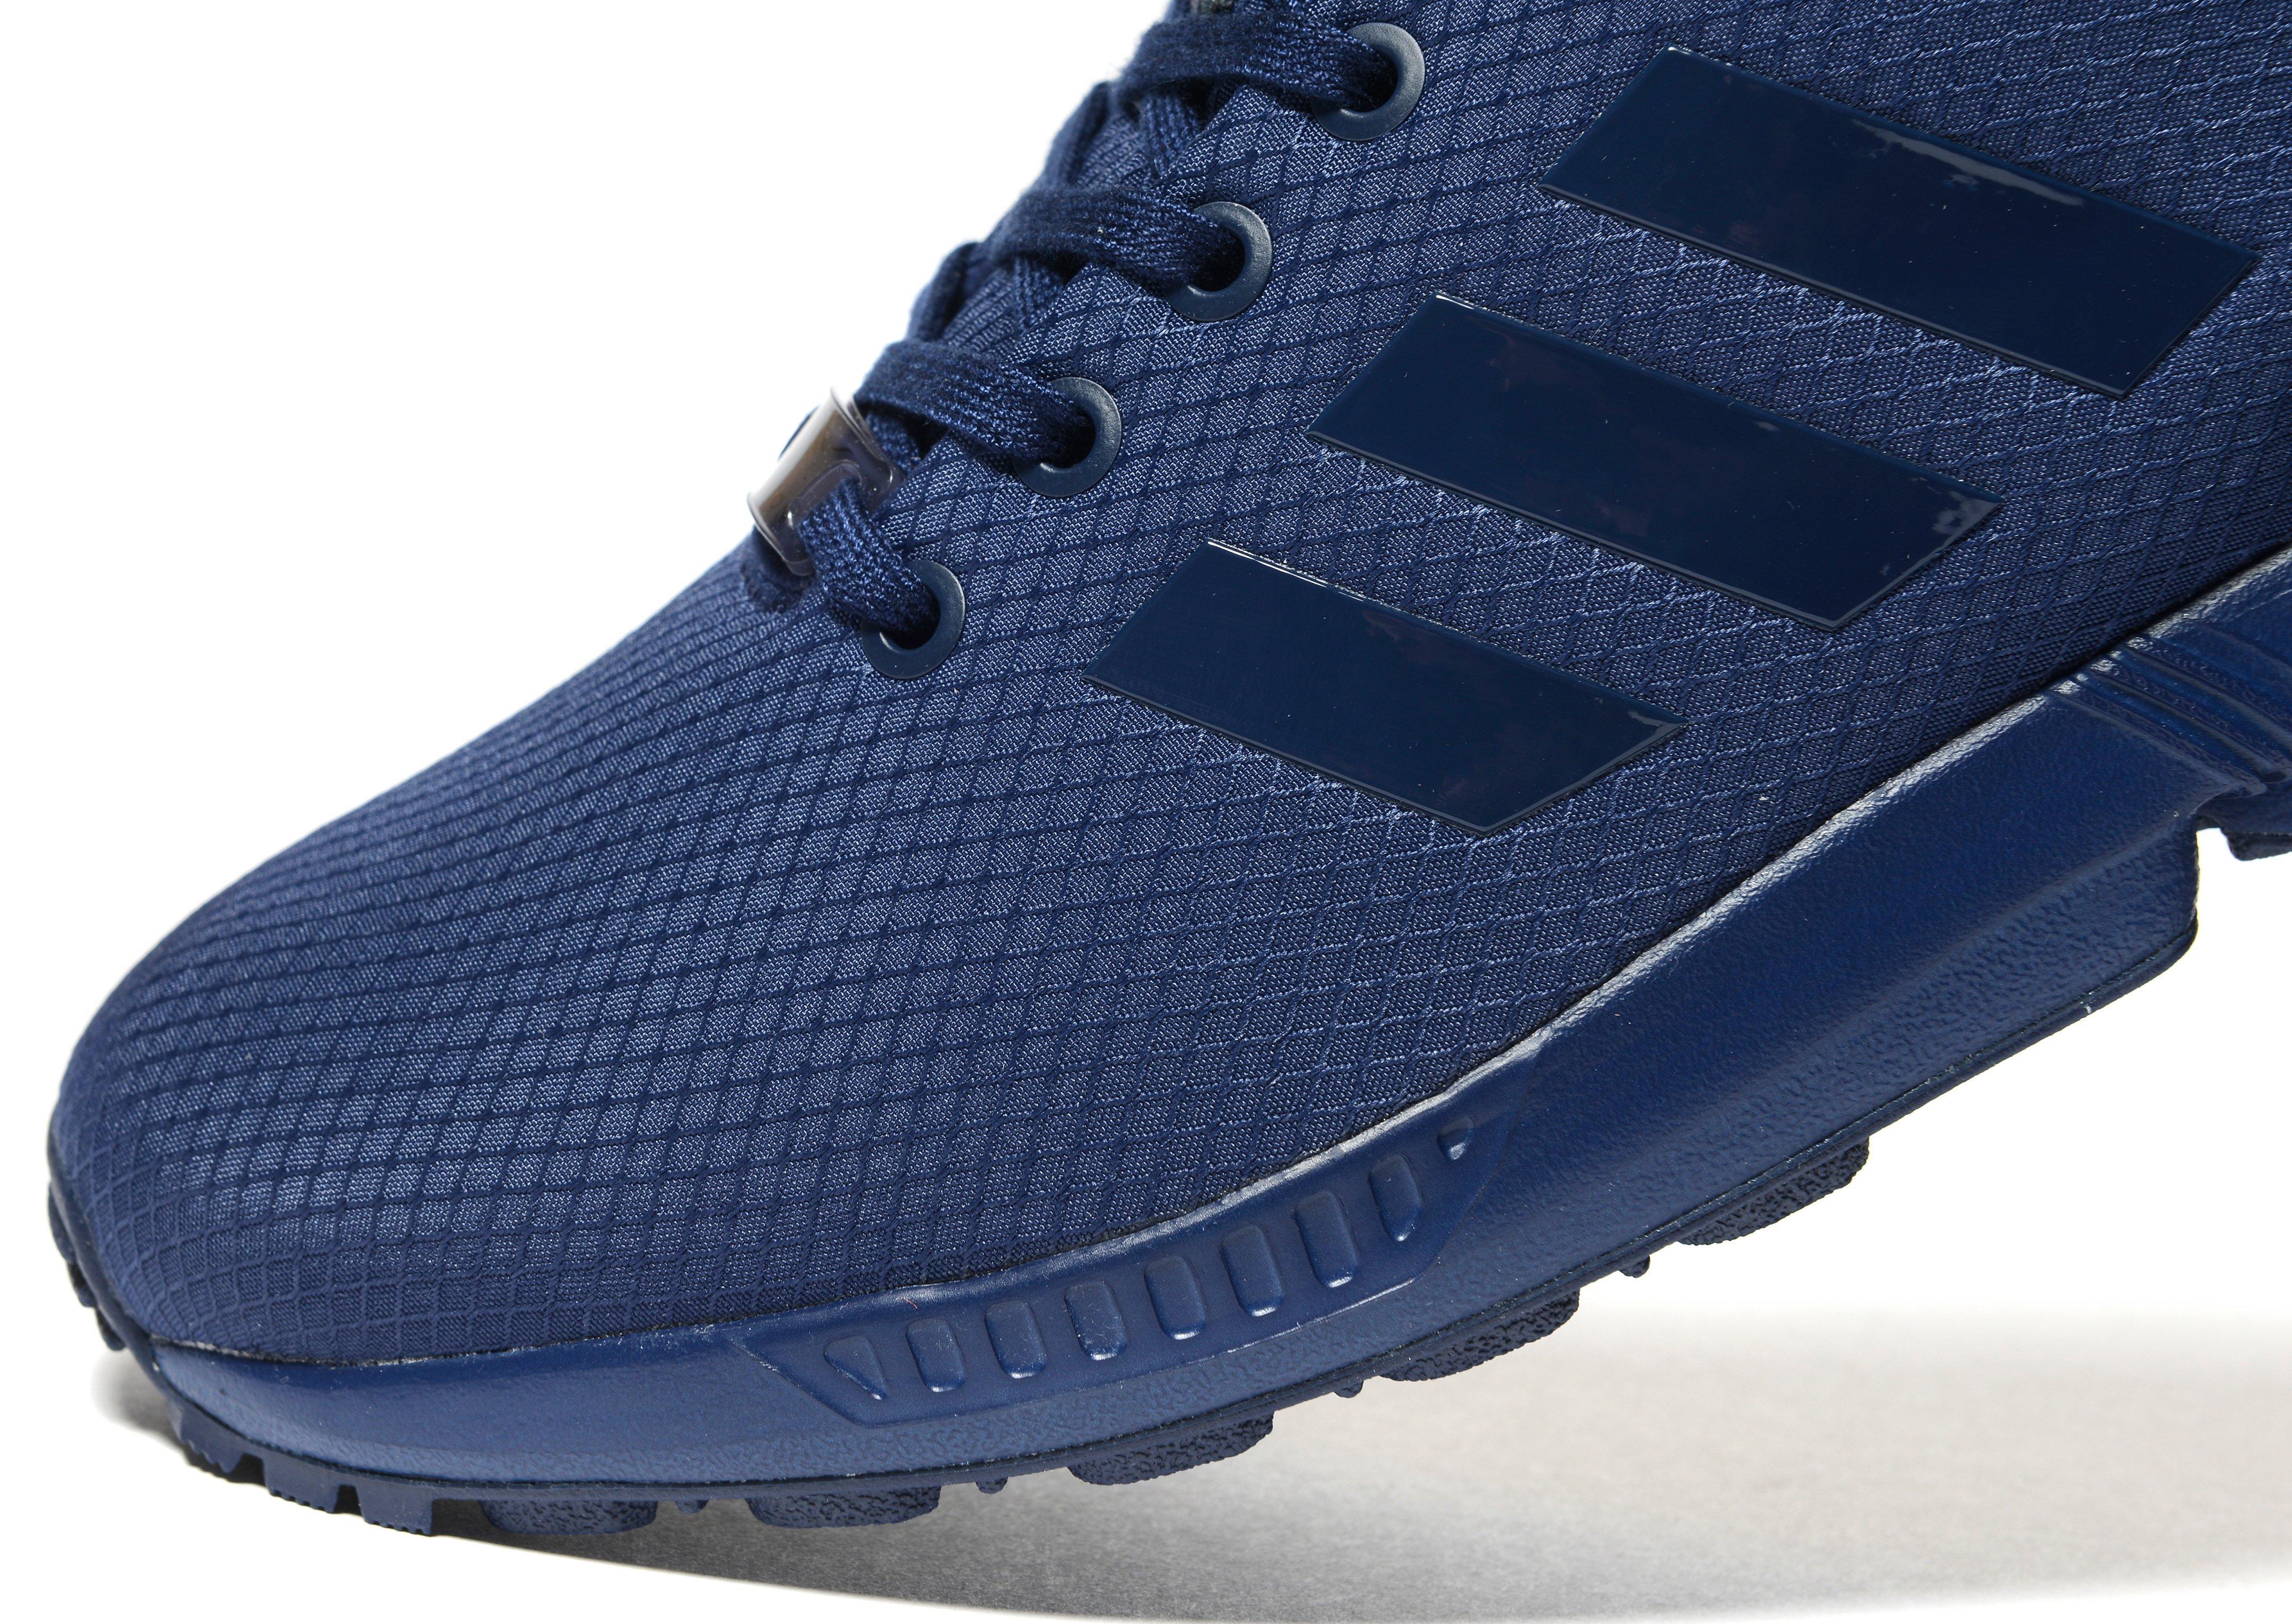 adidas zx flux navy and gold